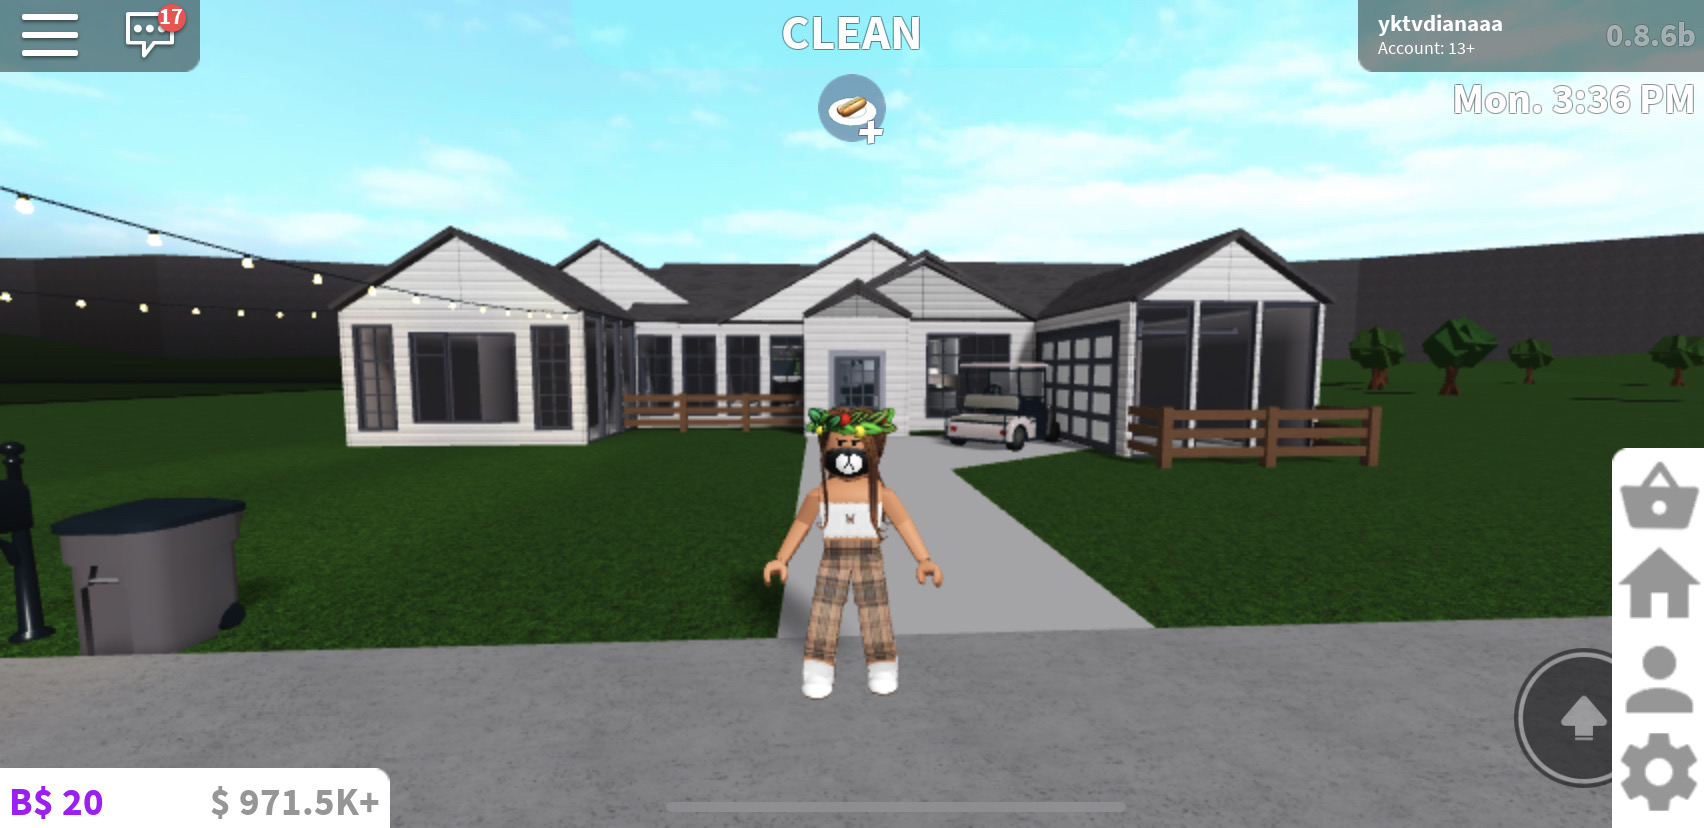 Roblox Bloxburg Houses Building Image By Roblox - roblox houses for 5k